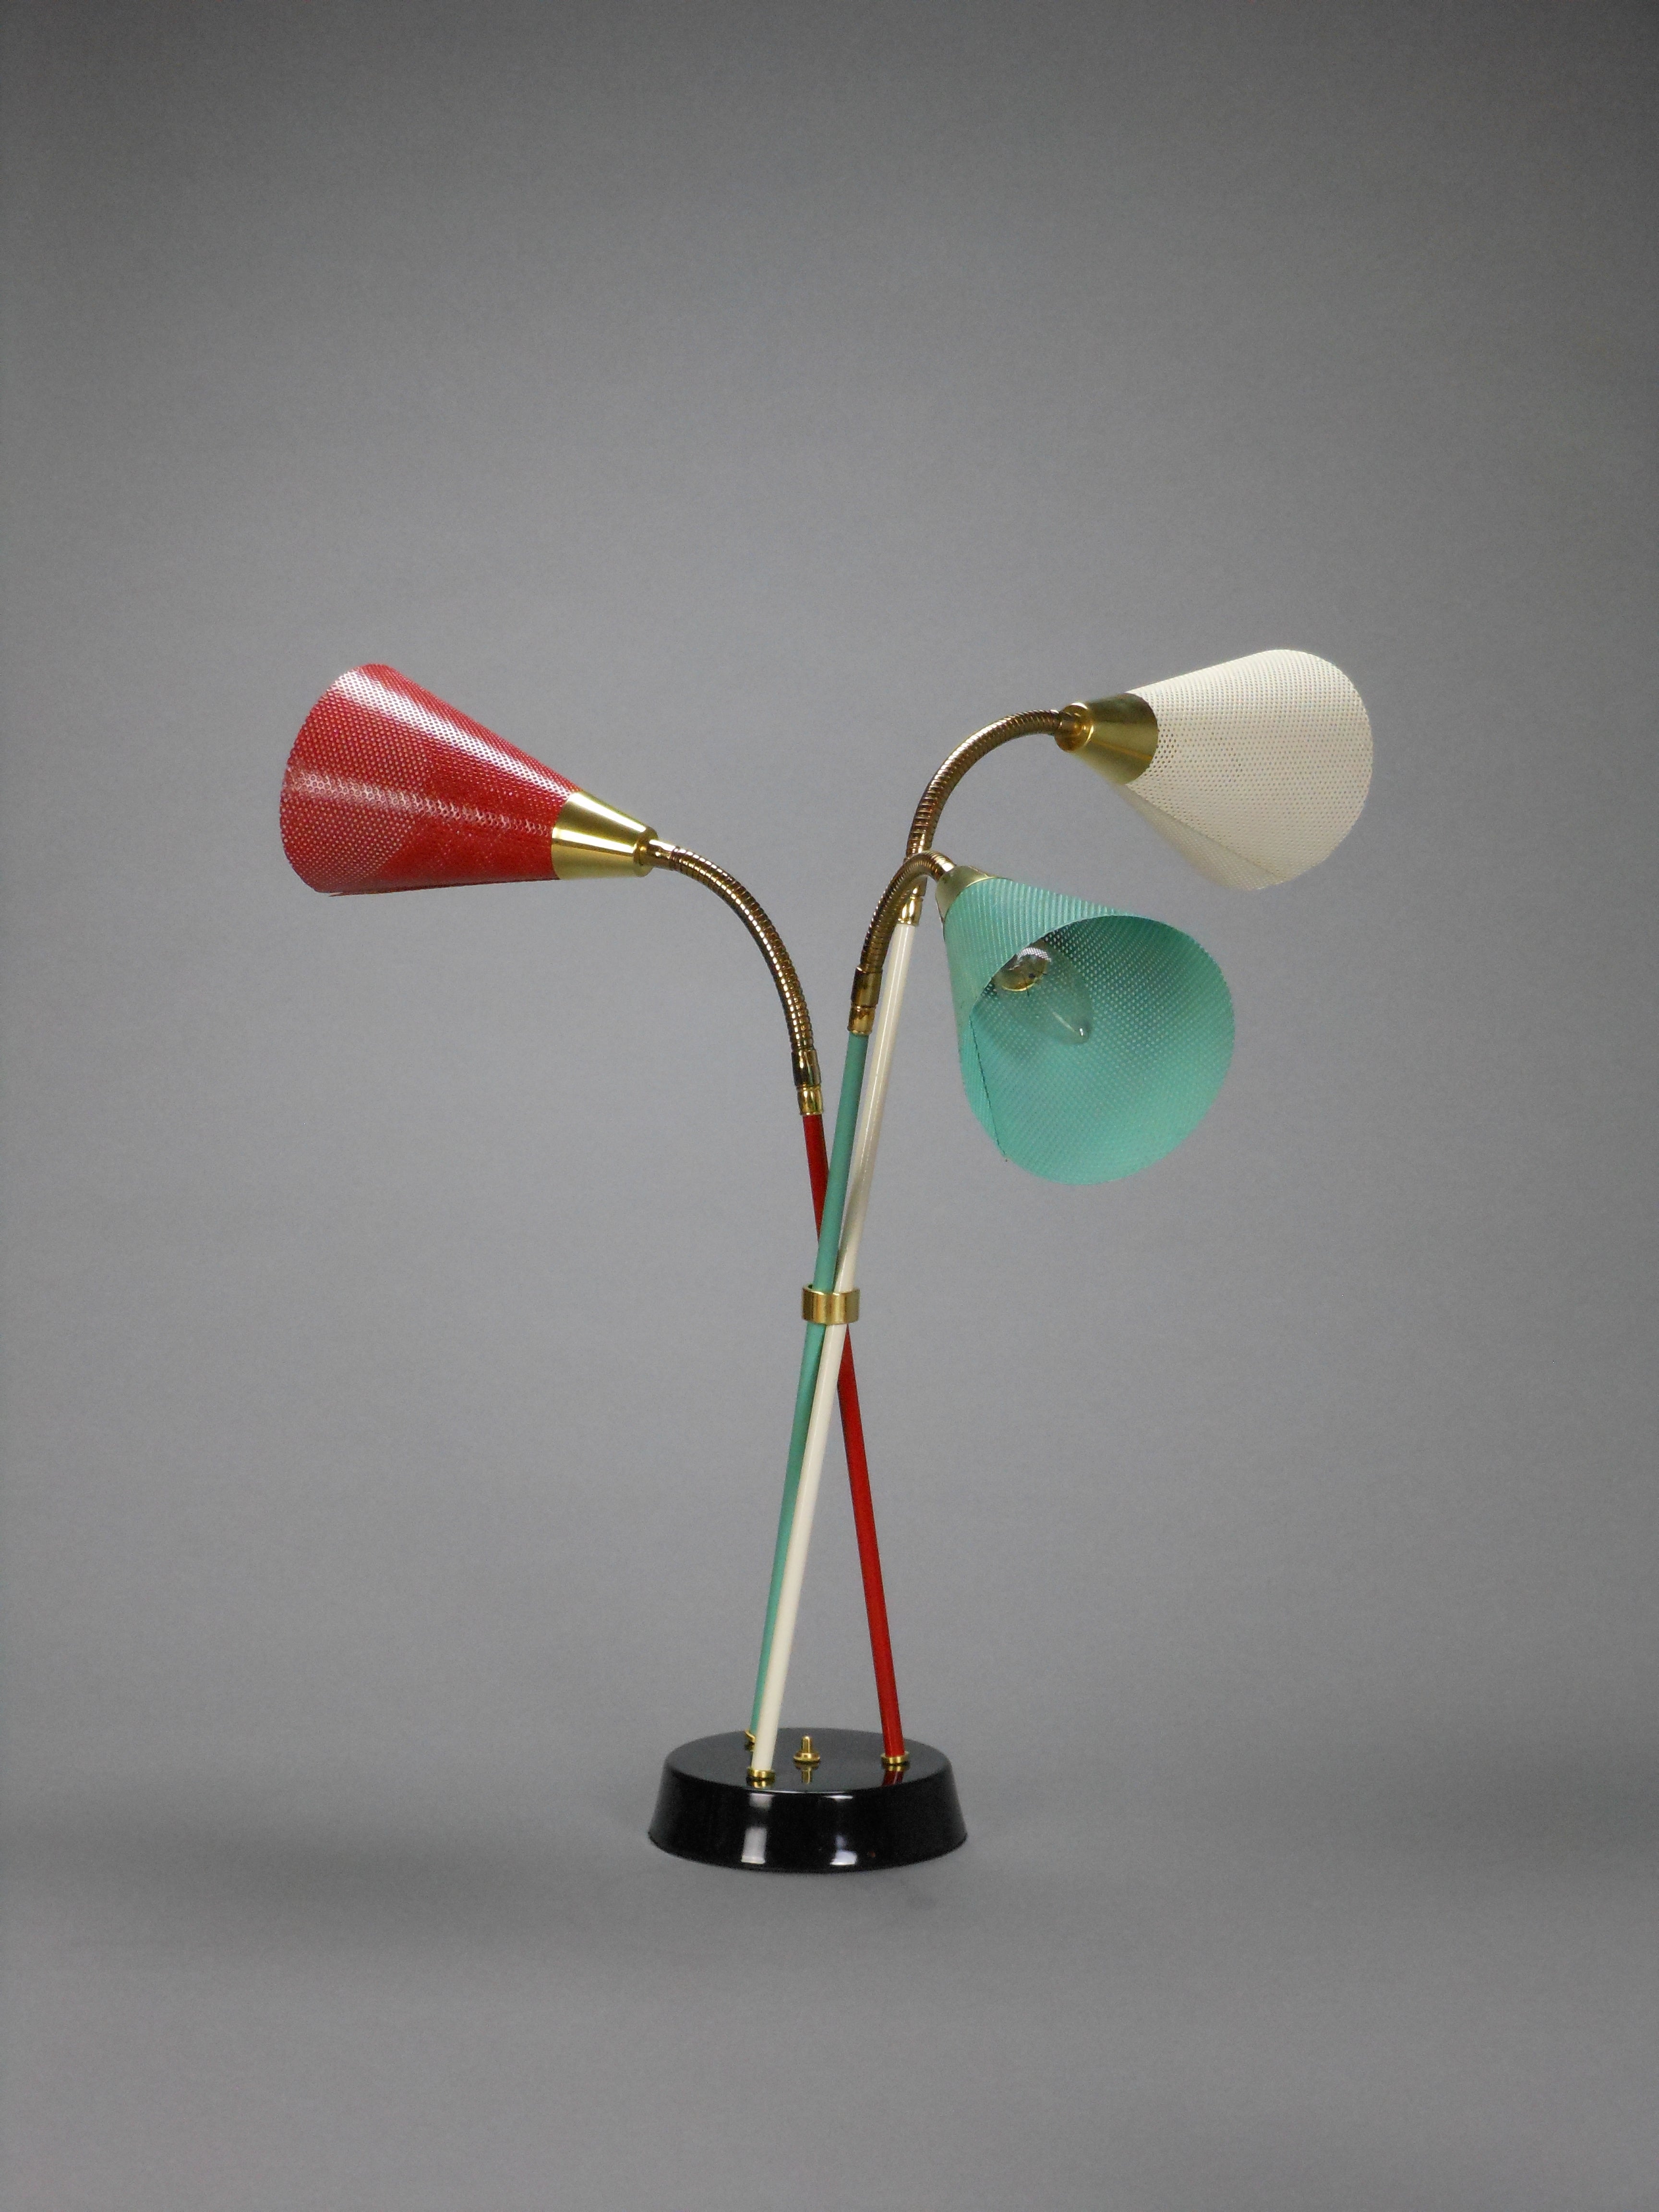 A 3-Light Polychrome and Brass Table Lamp with Perforated Shades